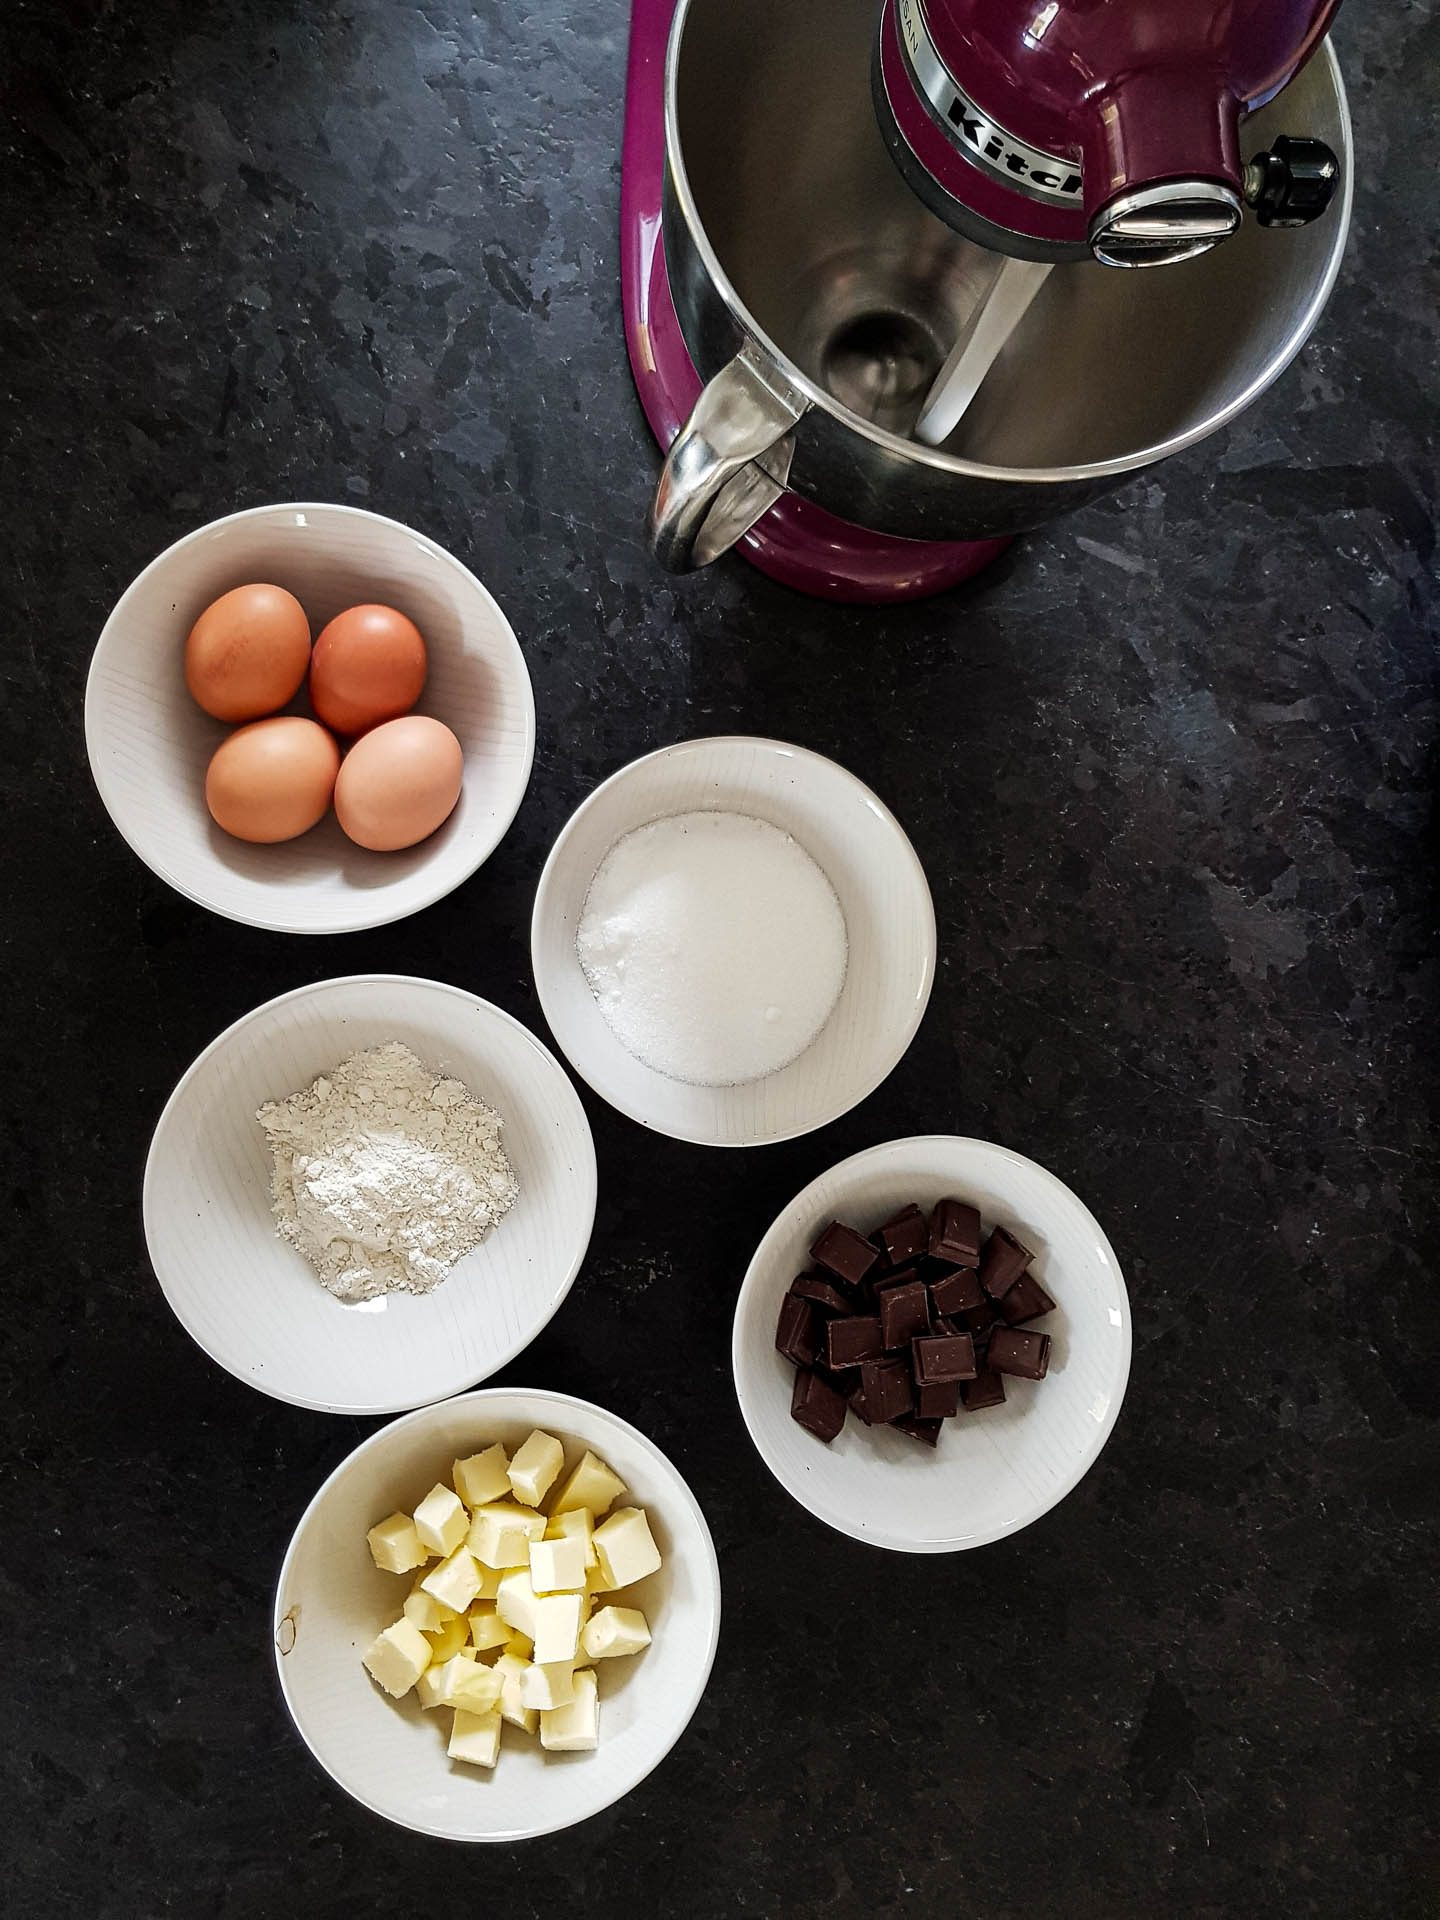 5 ingredients for perfect French chocolate fondant